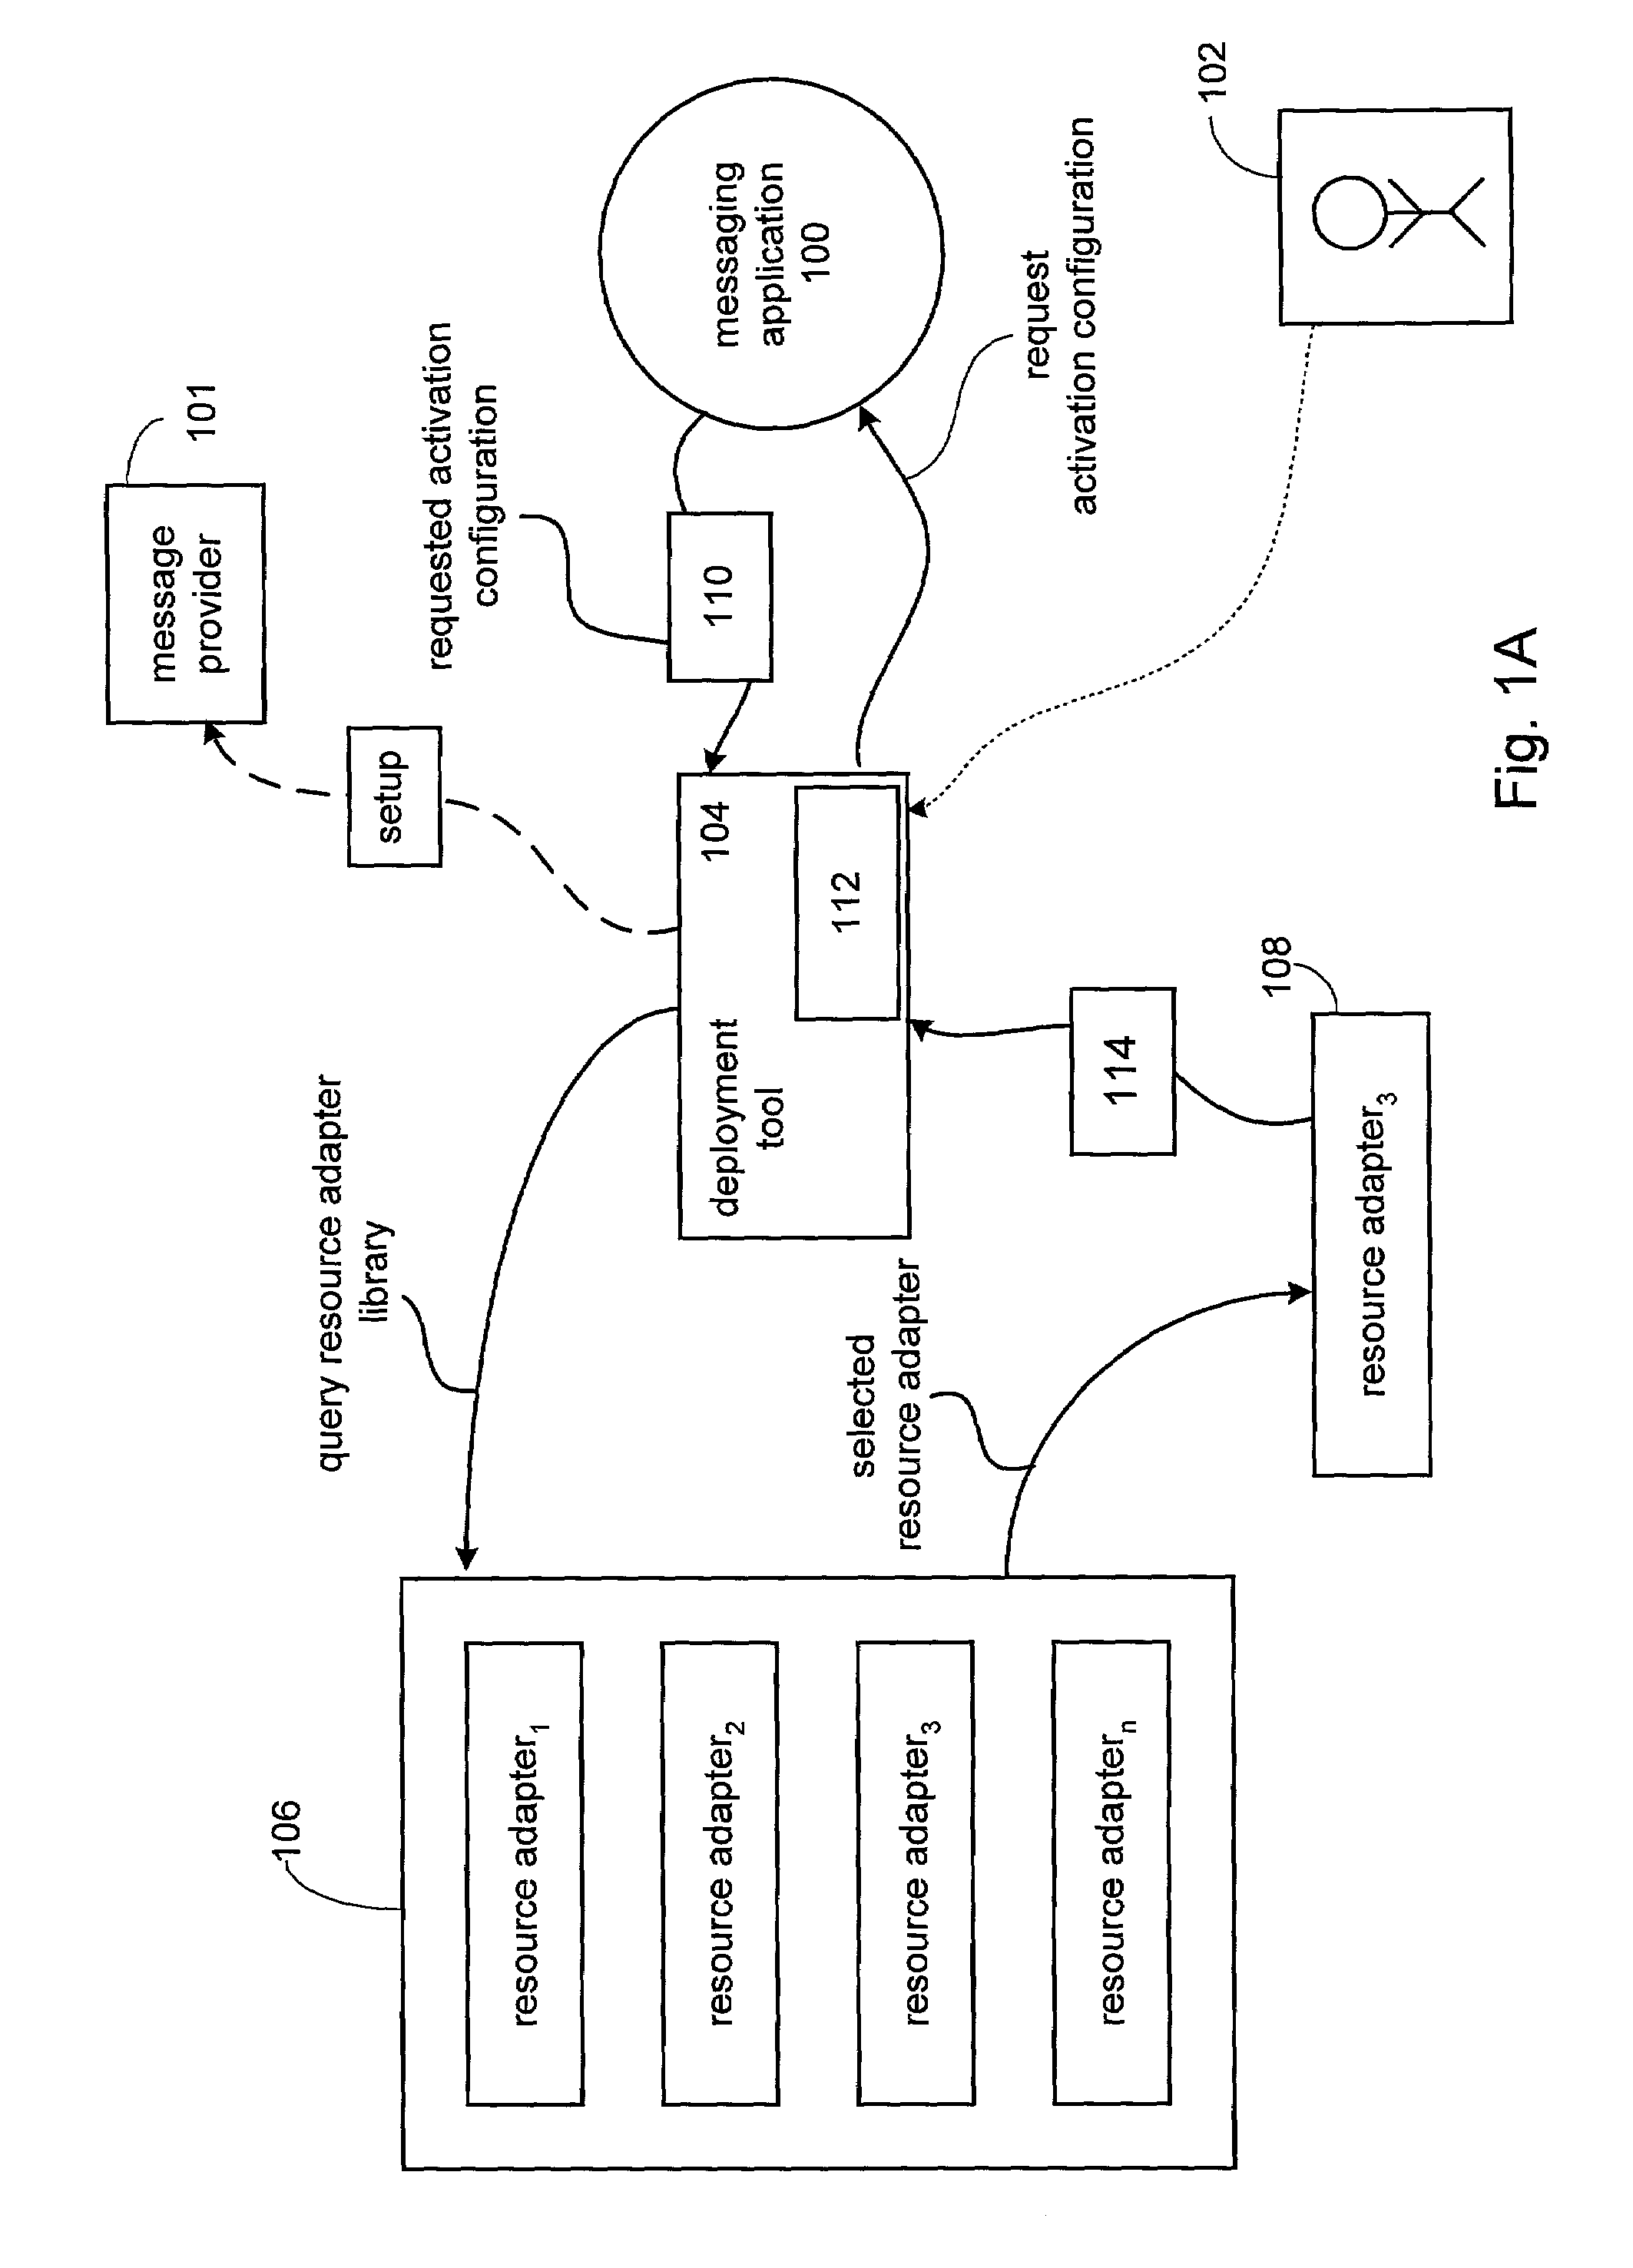 Architecture for plugging messaging systems into an application server